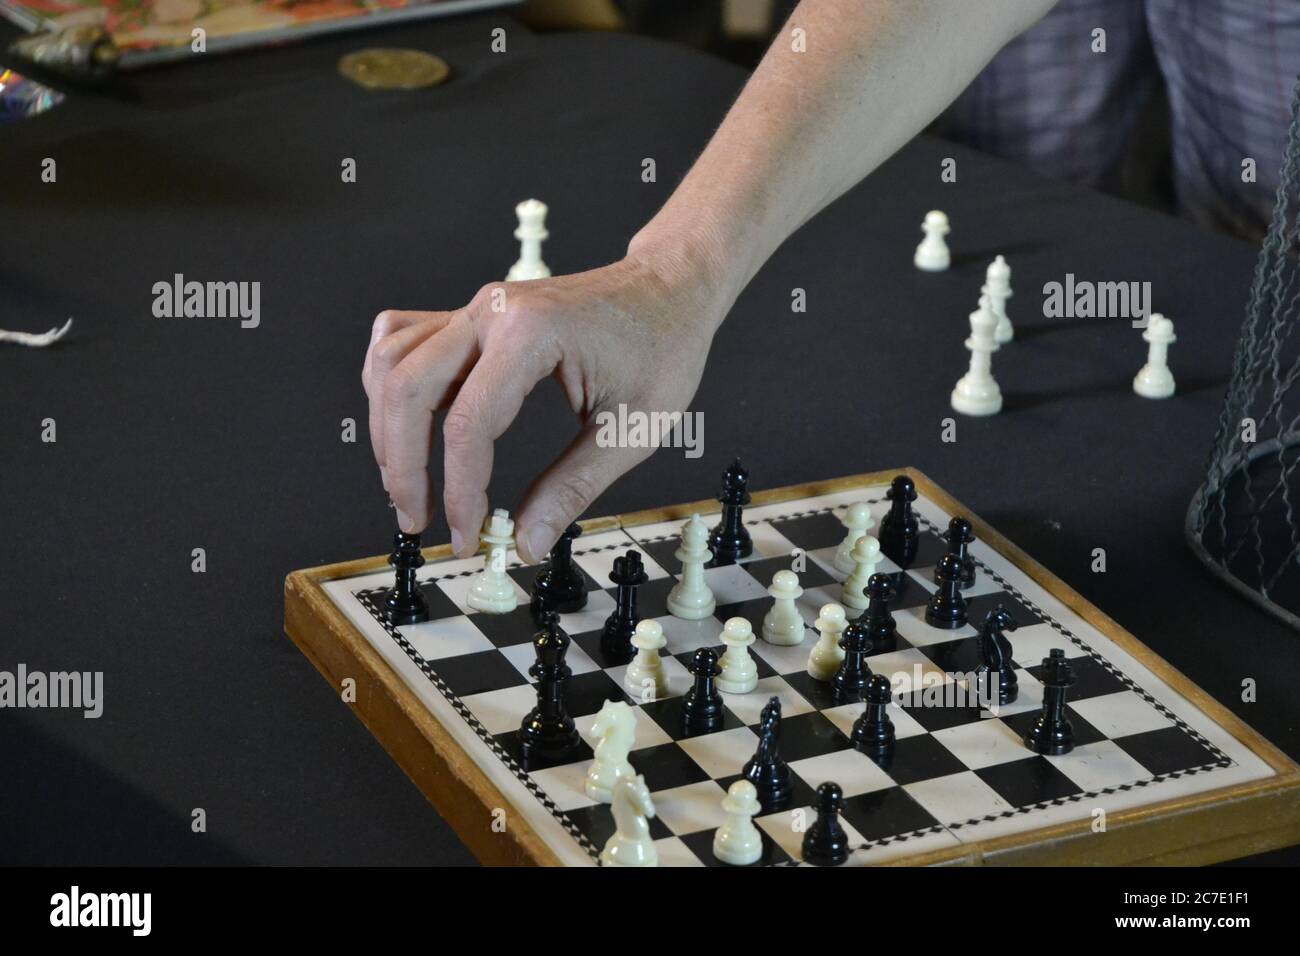 Chess game. Hand of a young man moving chess pieces on a board with white and black pieces on black background. Stock Photo